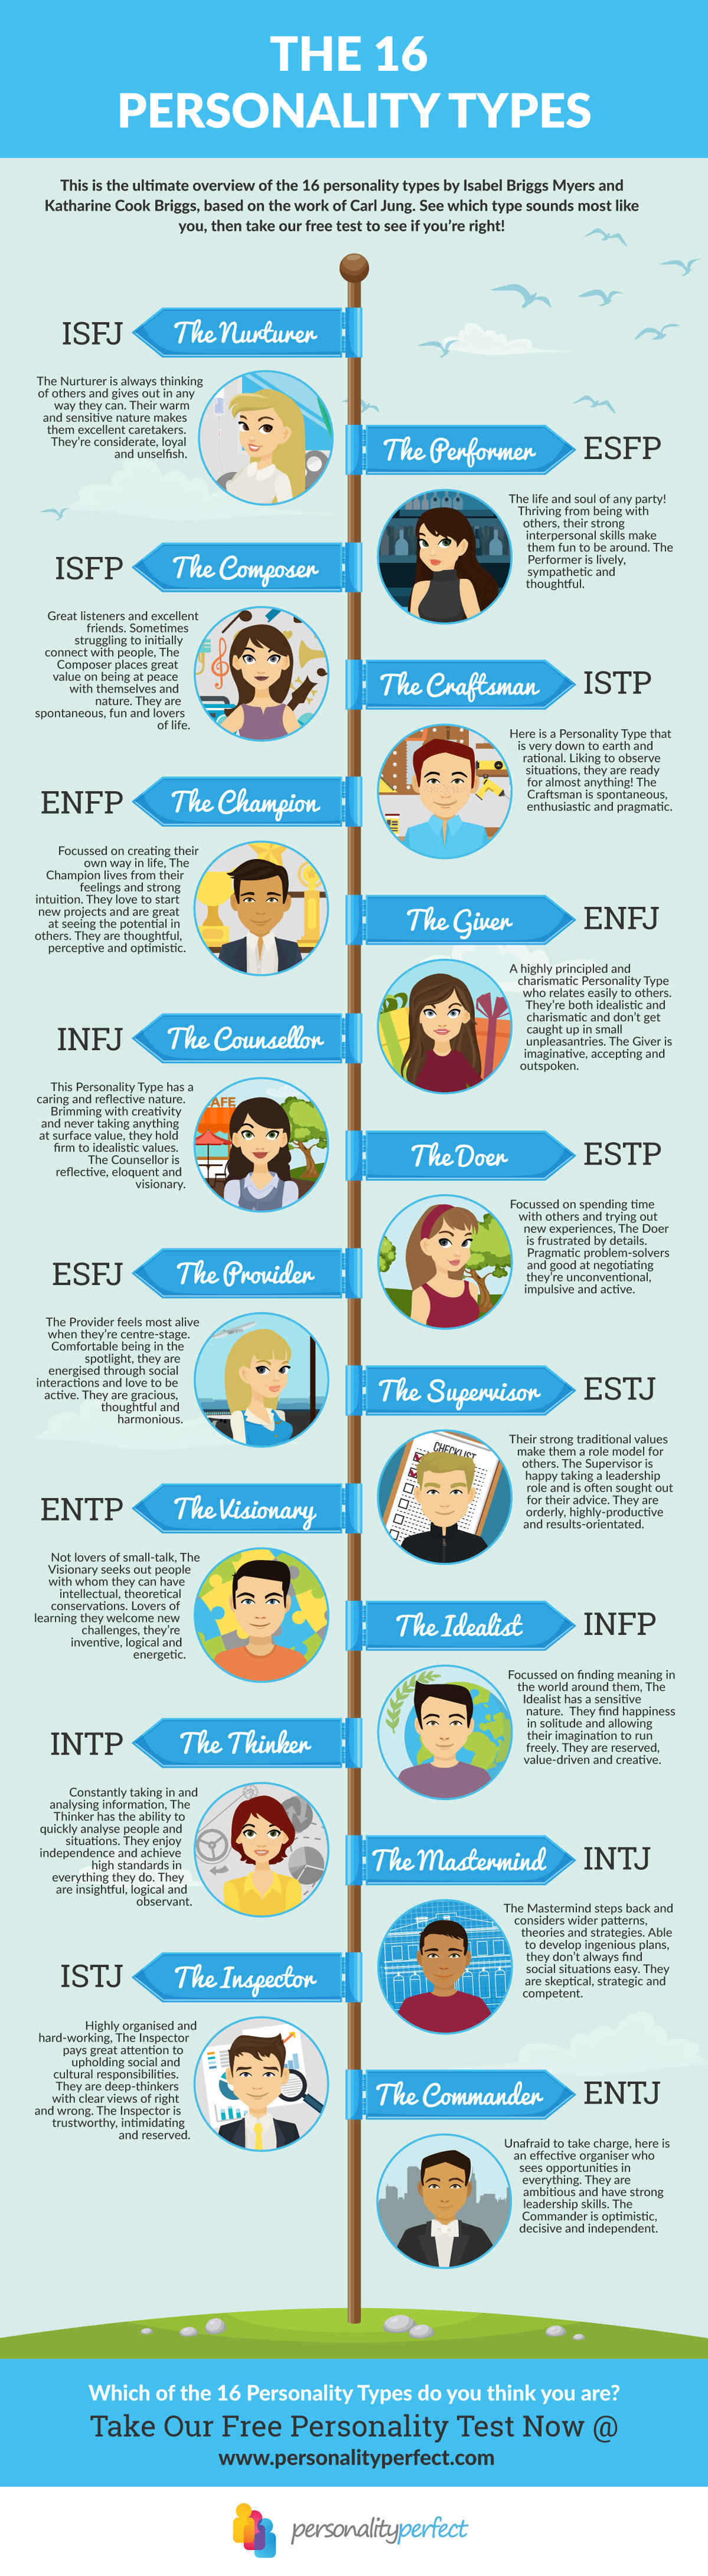 the-ultimate-16-personality-types-overview-personality-perfect